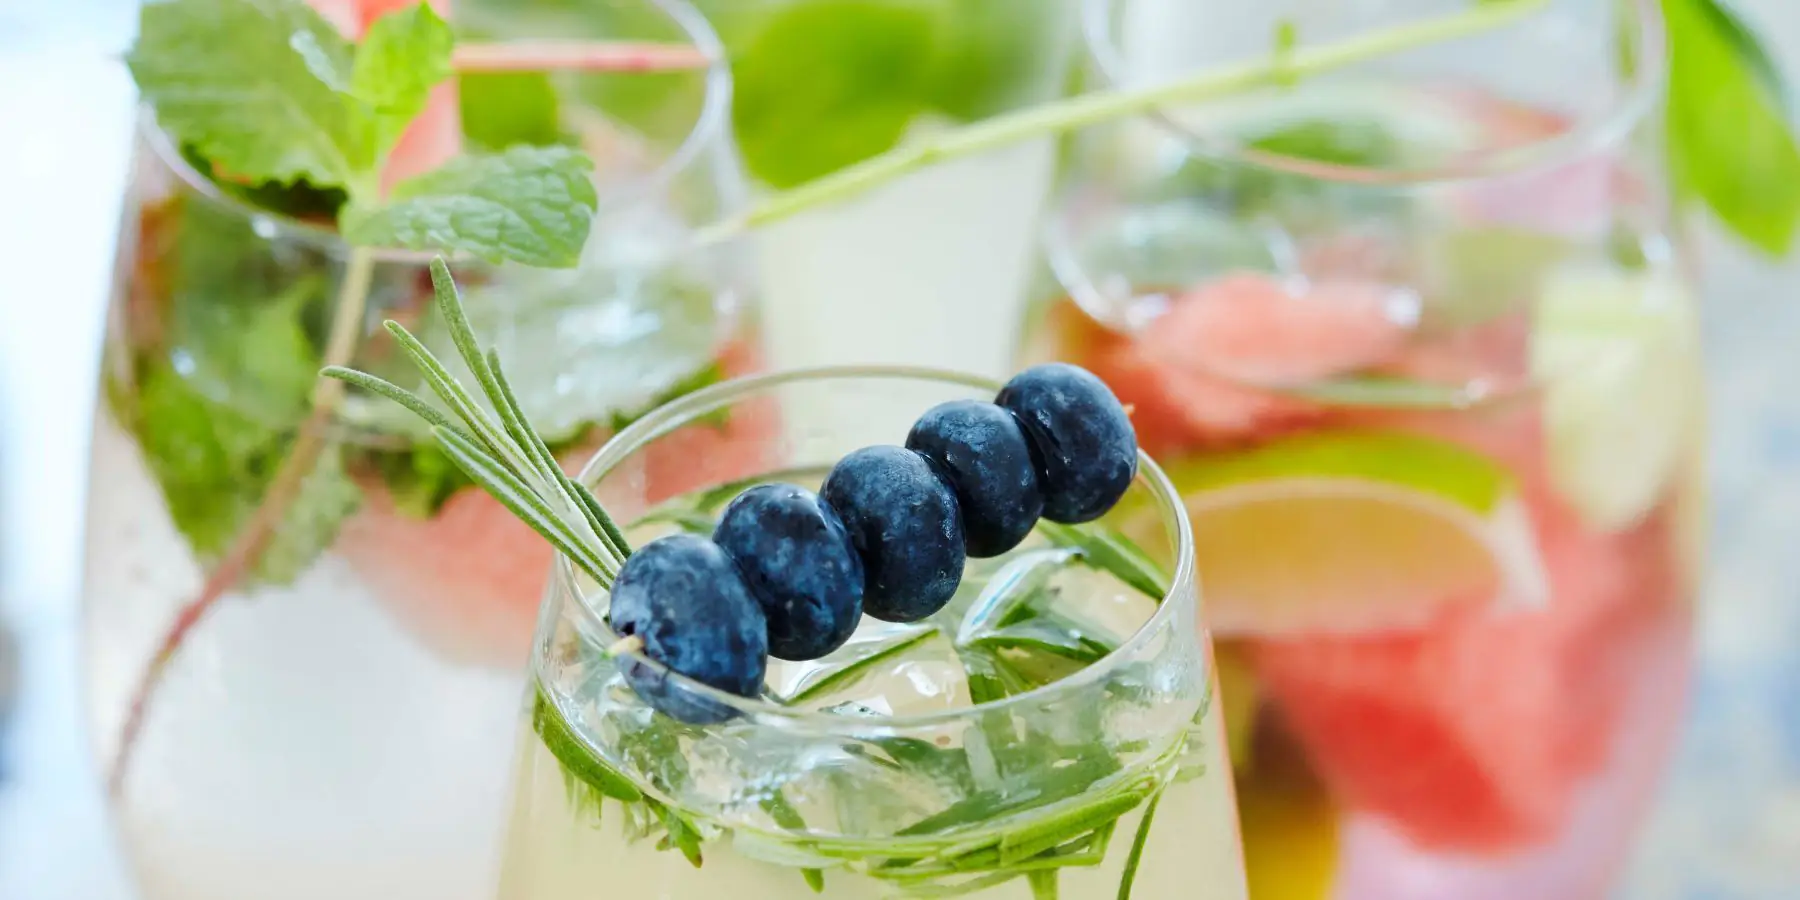 3 Beverage Stations Ideas for Your Next Party